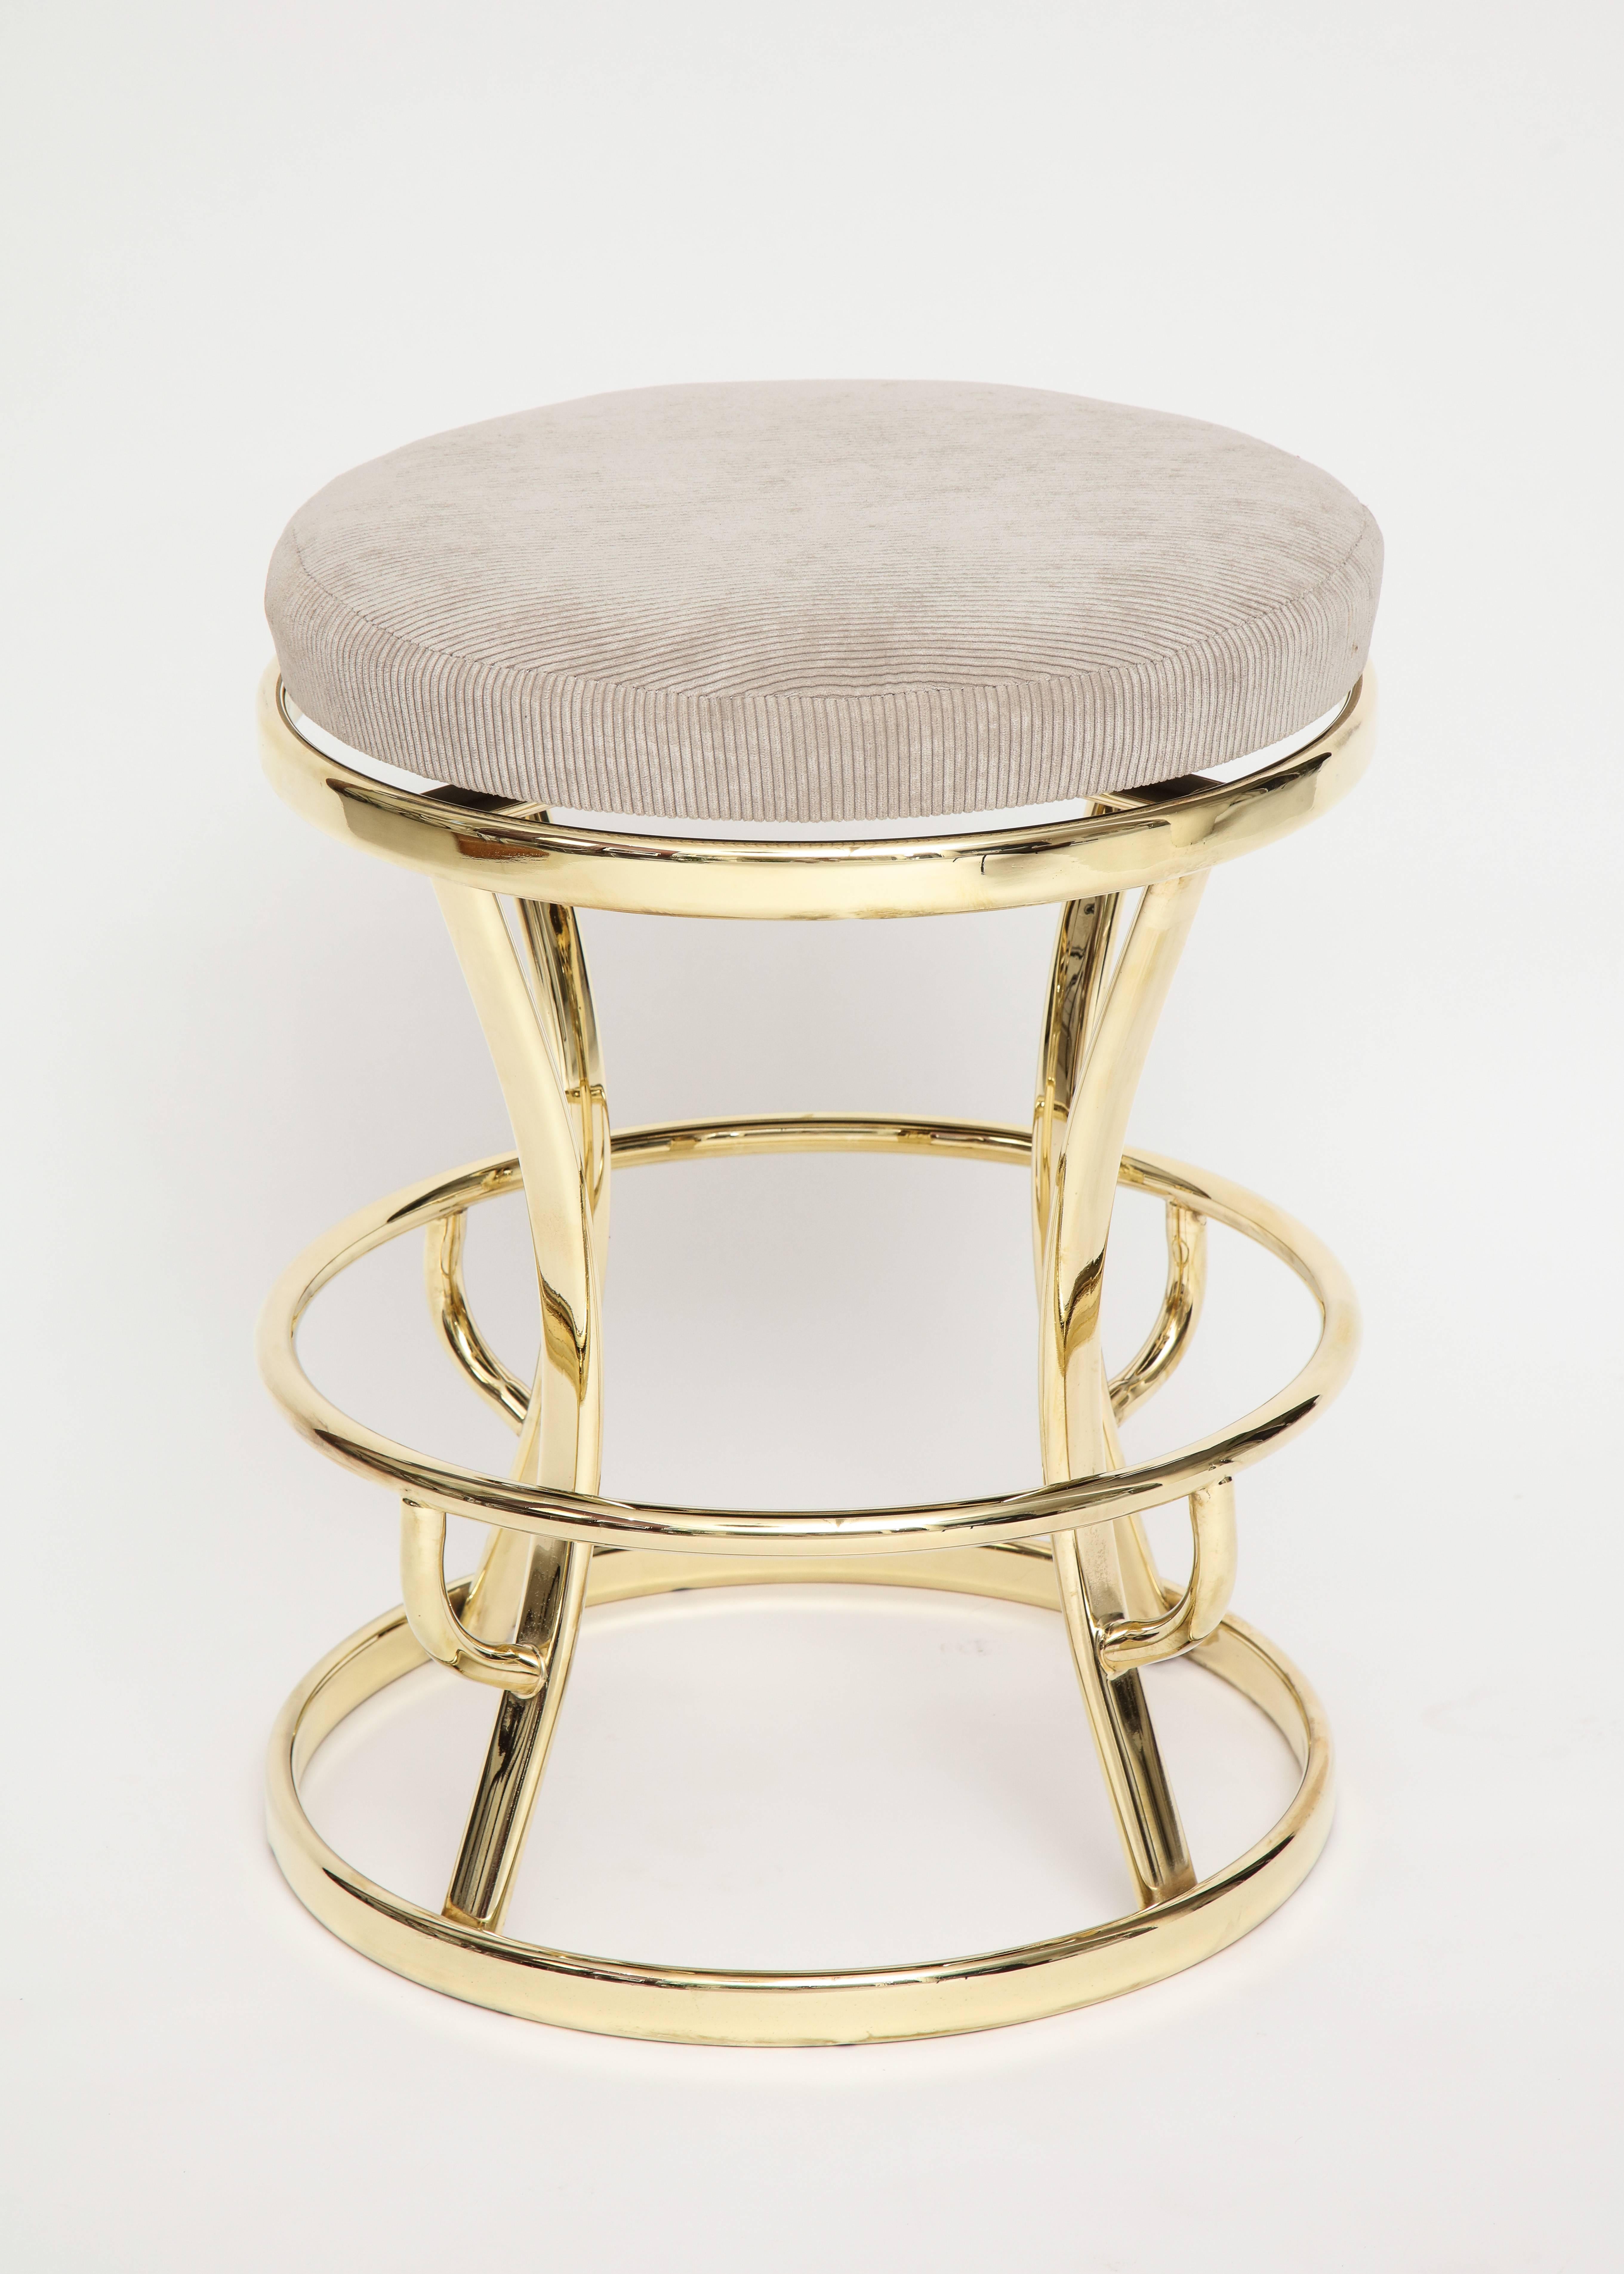 Brass and grey barstools, midcentury France, 1970s

Beautiful restored brass barstools with grey corduroy top that swivels. Adds Glamour to any room. Six total.